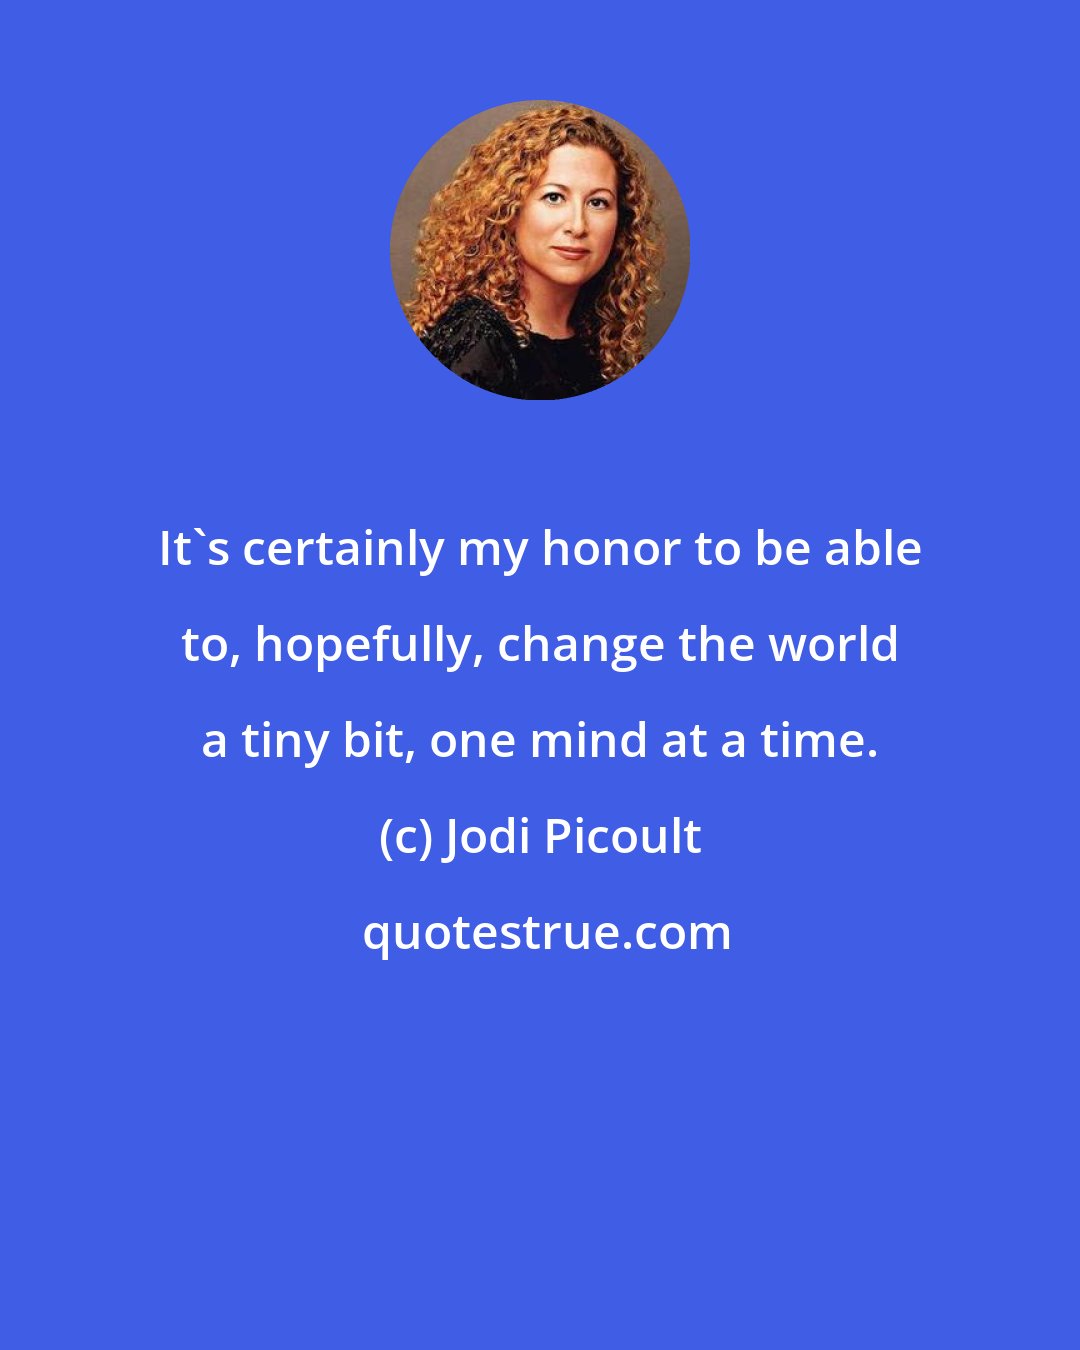 Jodi Picoult: It's certainly my honor to be able to, hopefully, change the world a tiny bit, one mind at a time.